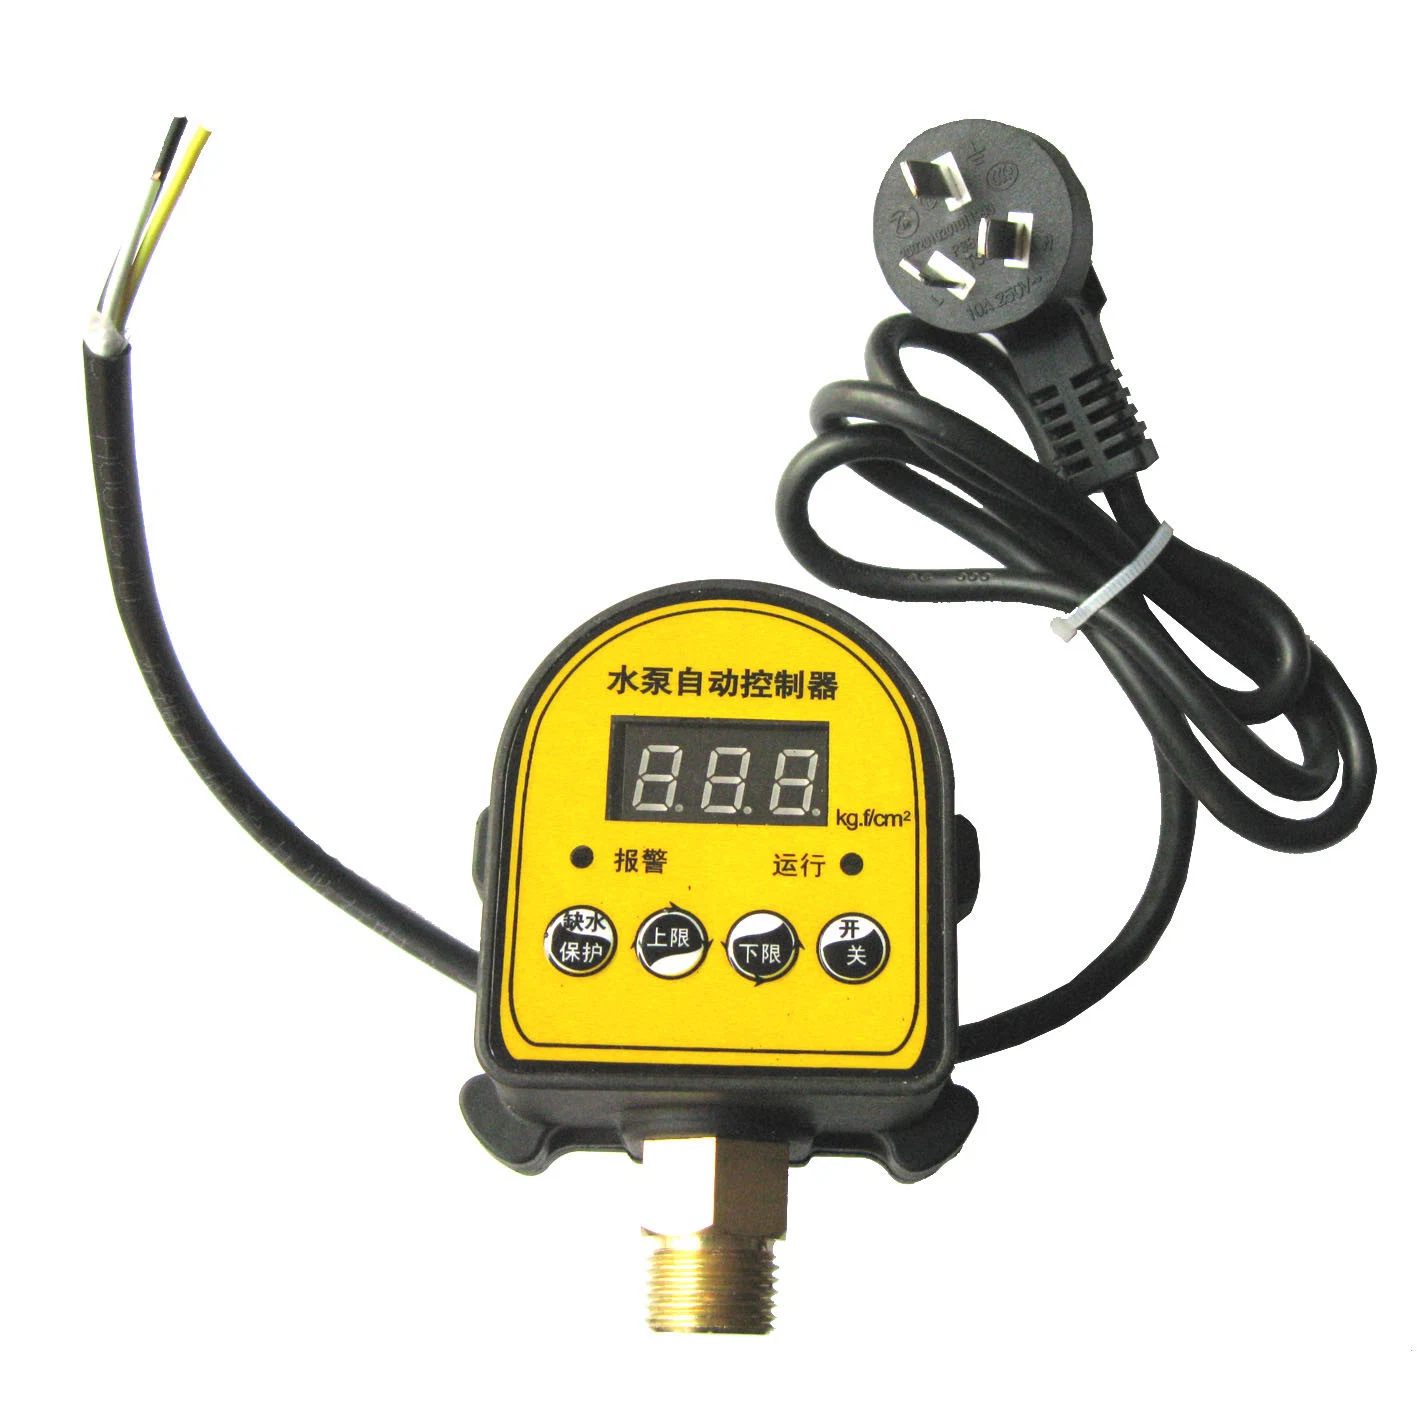 24VDC, 220V Industrial Pump Control Price Pressure Switch with Good Service MD-Swf